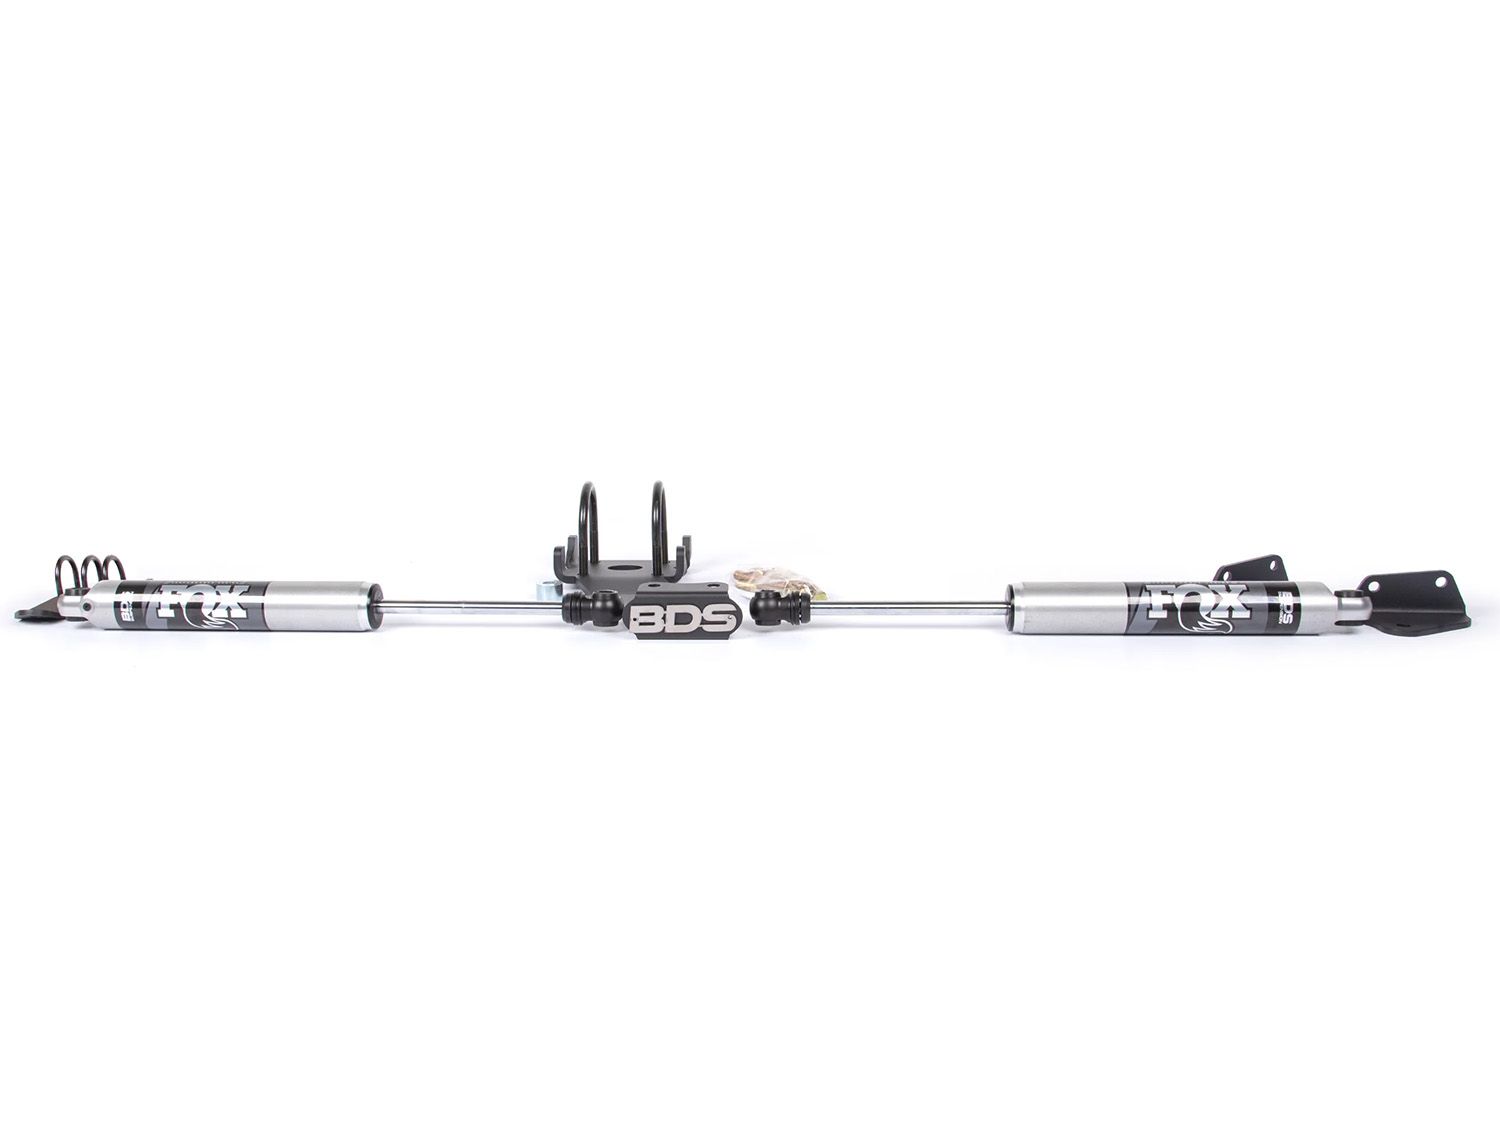 Ram 3500 2008-2012 Dodge 4WD - Fox Dual Steering Stabilizer by BDS